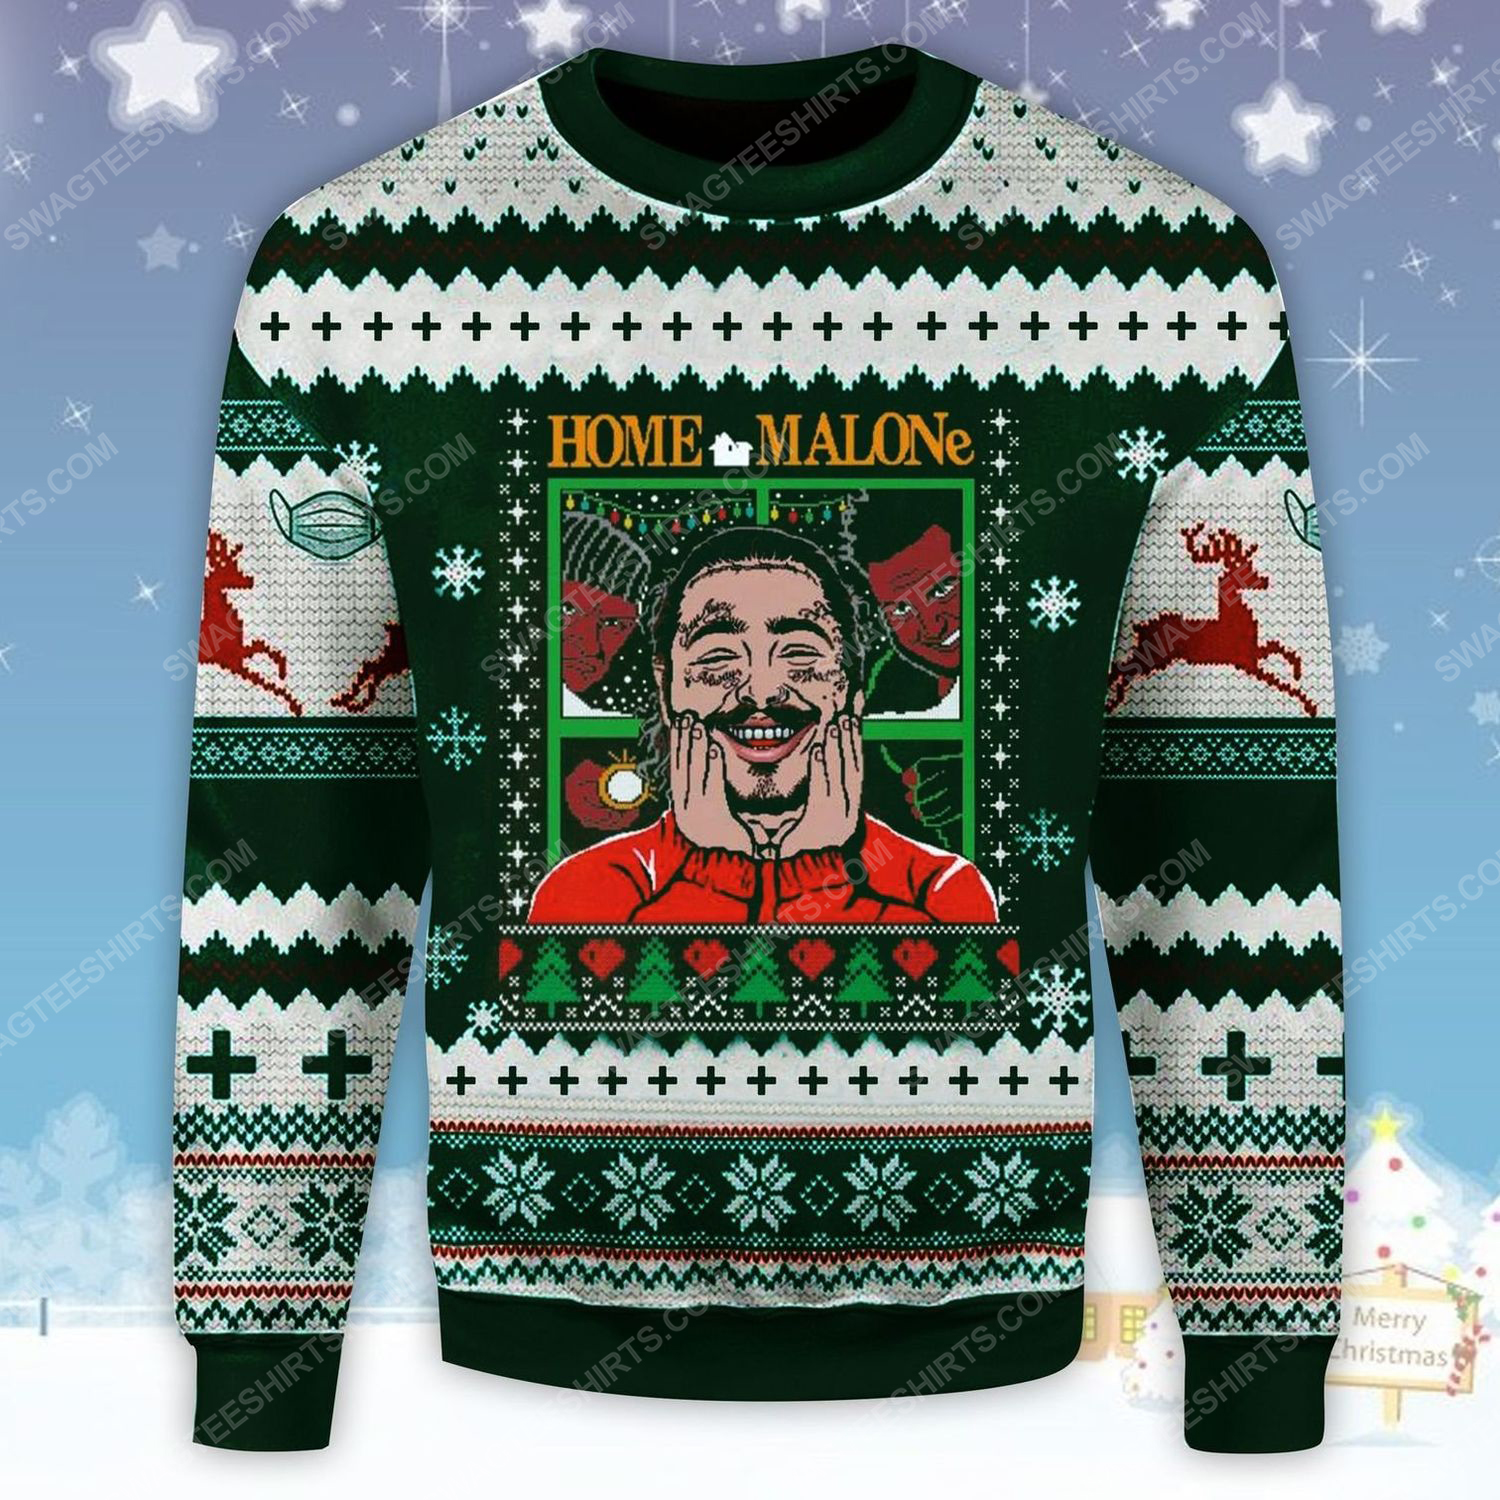 Home alone post malone ugly christmas sweater